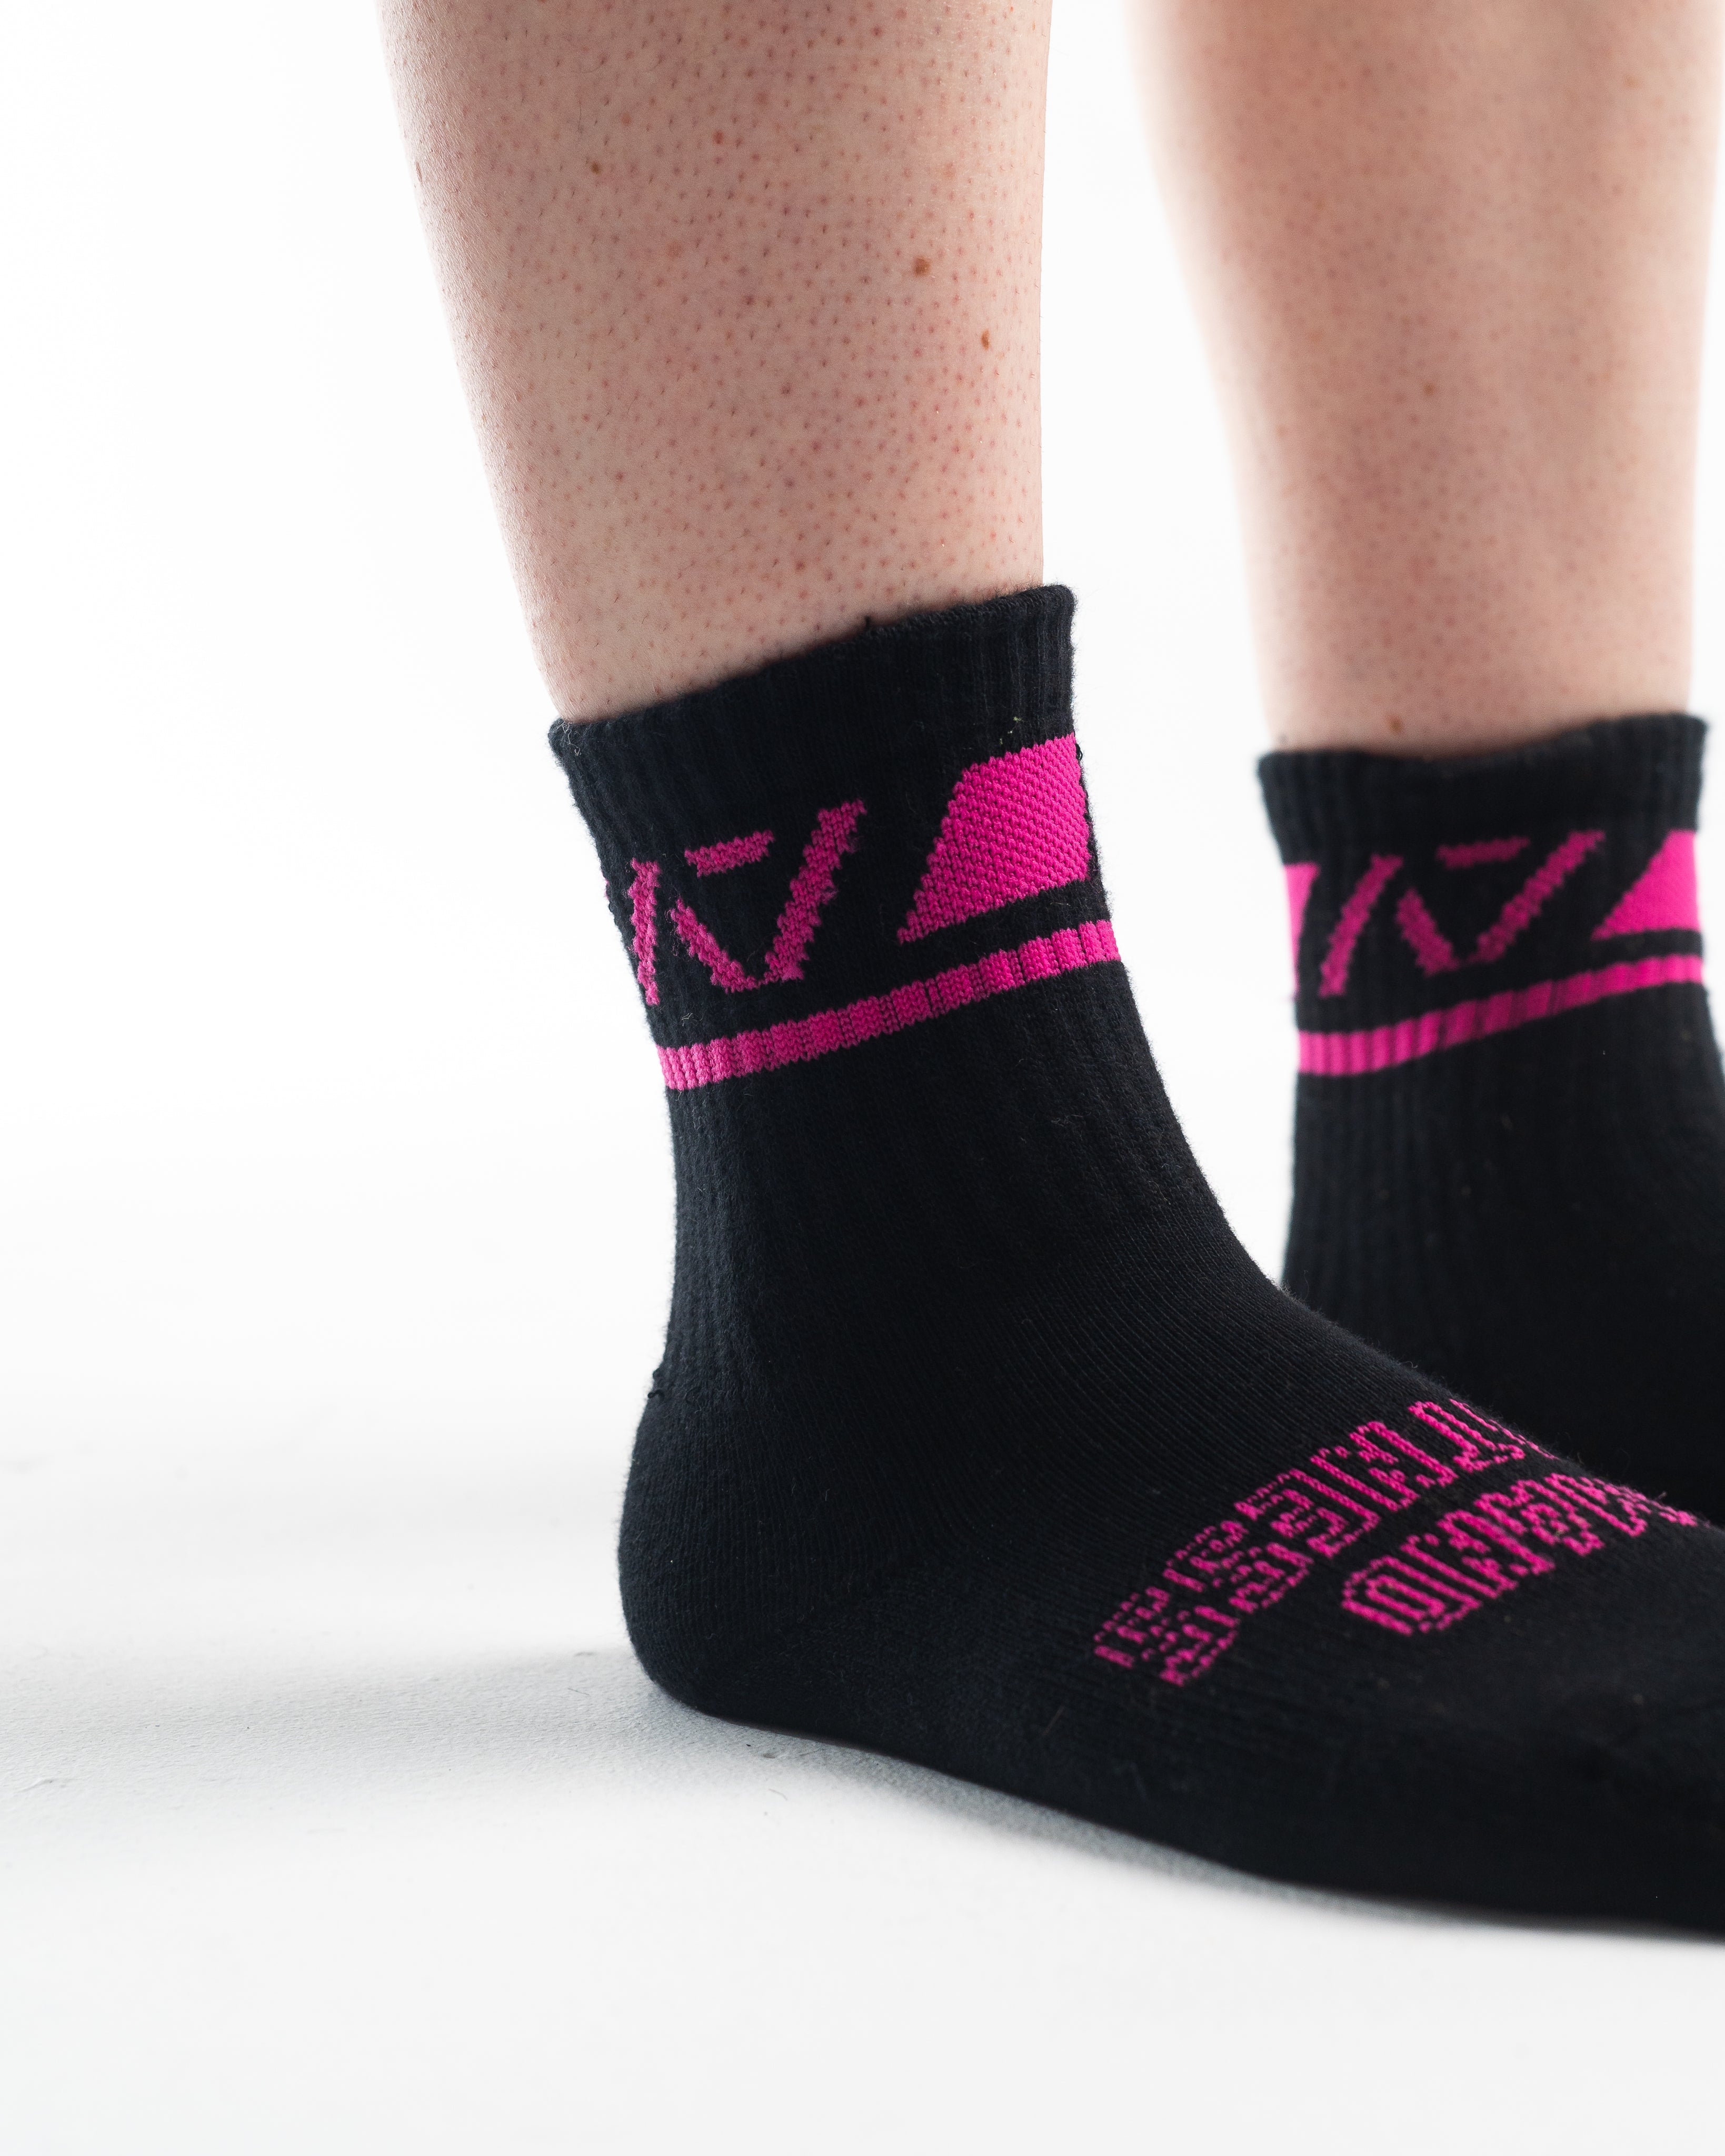 A7 Flamingo Crew socks showcase pink logos and let your energy show on the platform, in your training or while out and about. The IPF Approved Flamingo Meet Kit includes Powerlifting Singlet, A7 Meet Shirt, A7 Zebra Wrist Wraps, A7 Deadlift Socks, Hourglass Knee Sleeves (Stiff Knee Sleeves and Rigor Mortis Knee Sleeves). All A7 Powerlifting Equipment shipping to UK, Norway, Switzerland 